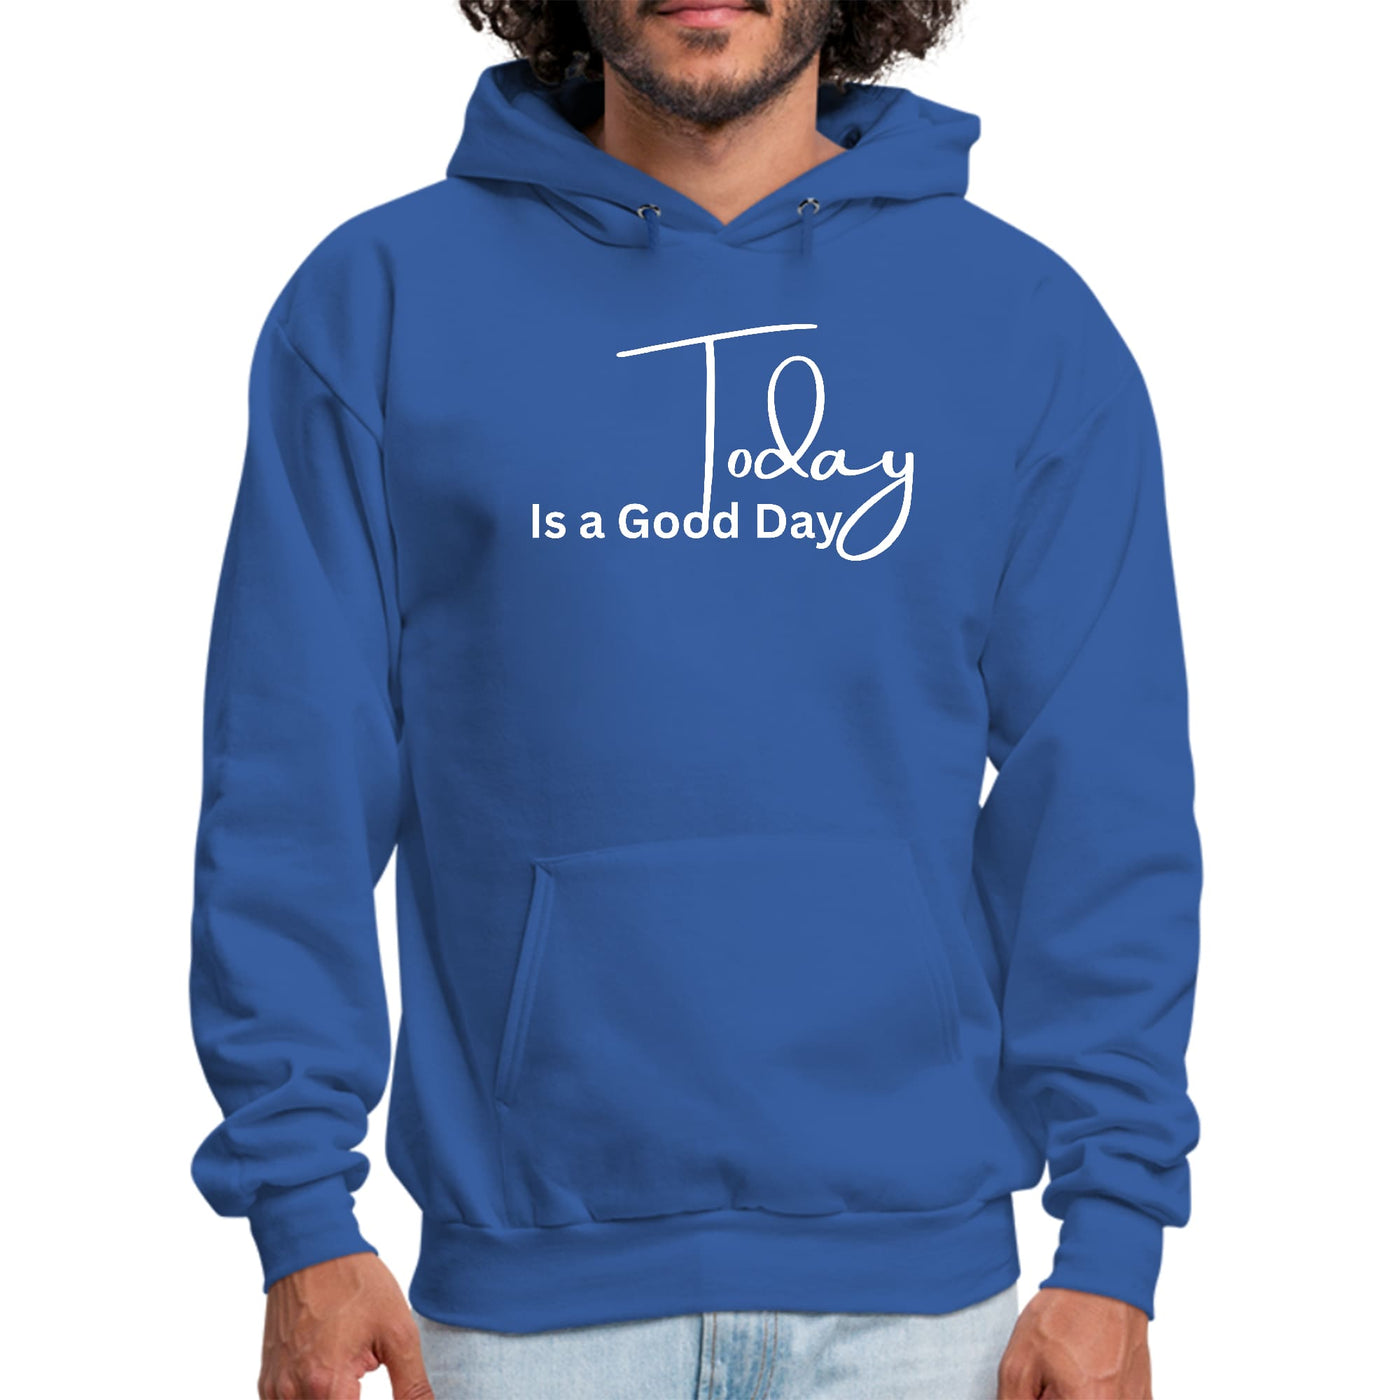 Graphic Hoodie Today Is a Good Day - Unisex | Hoodies